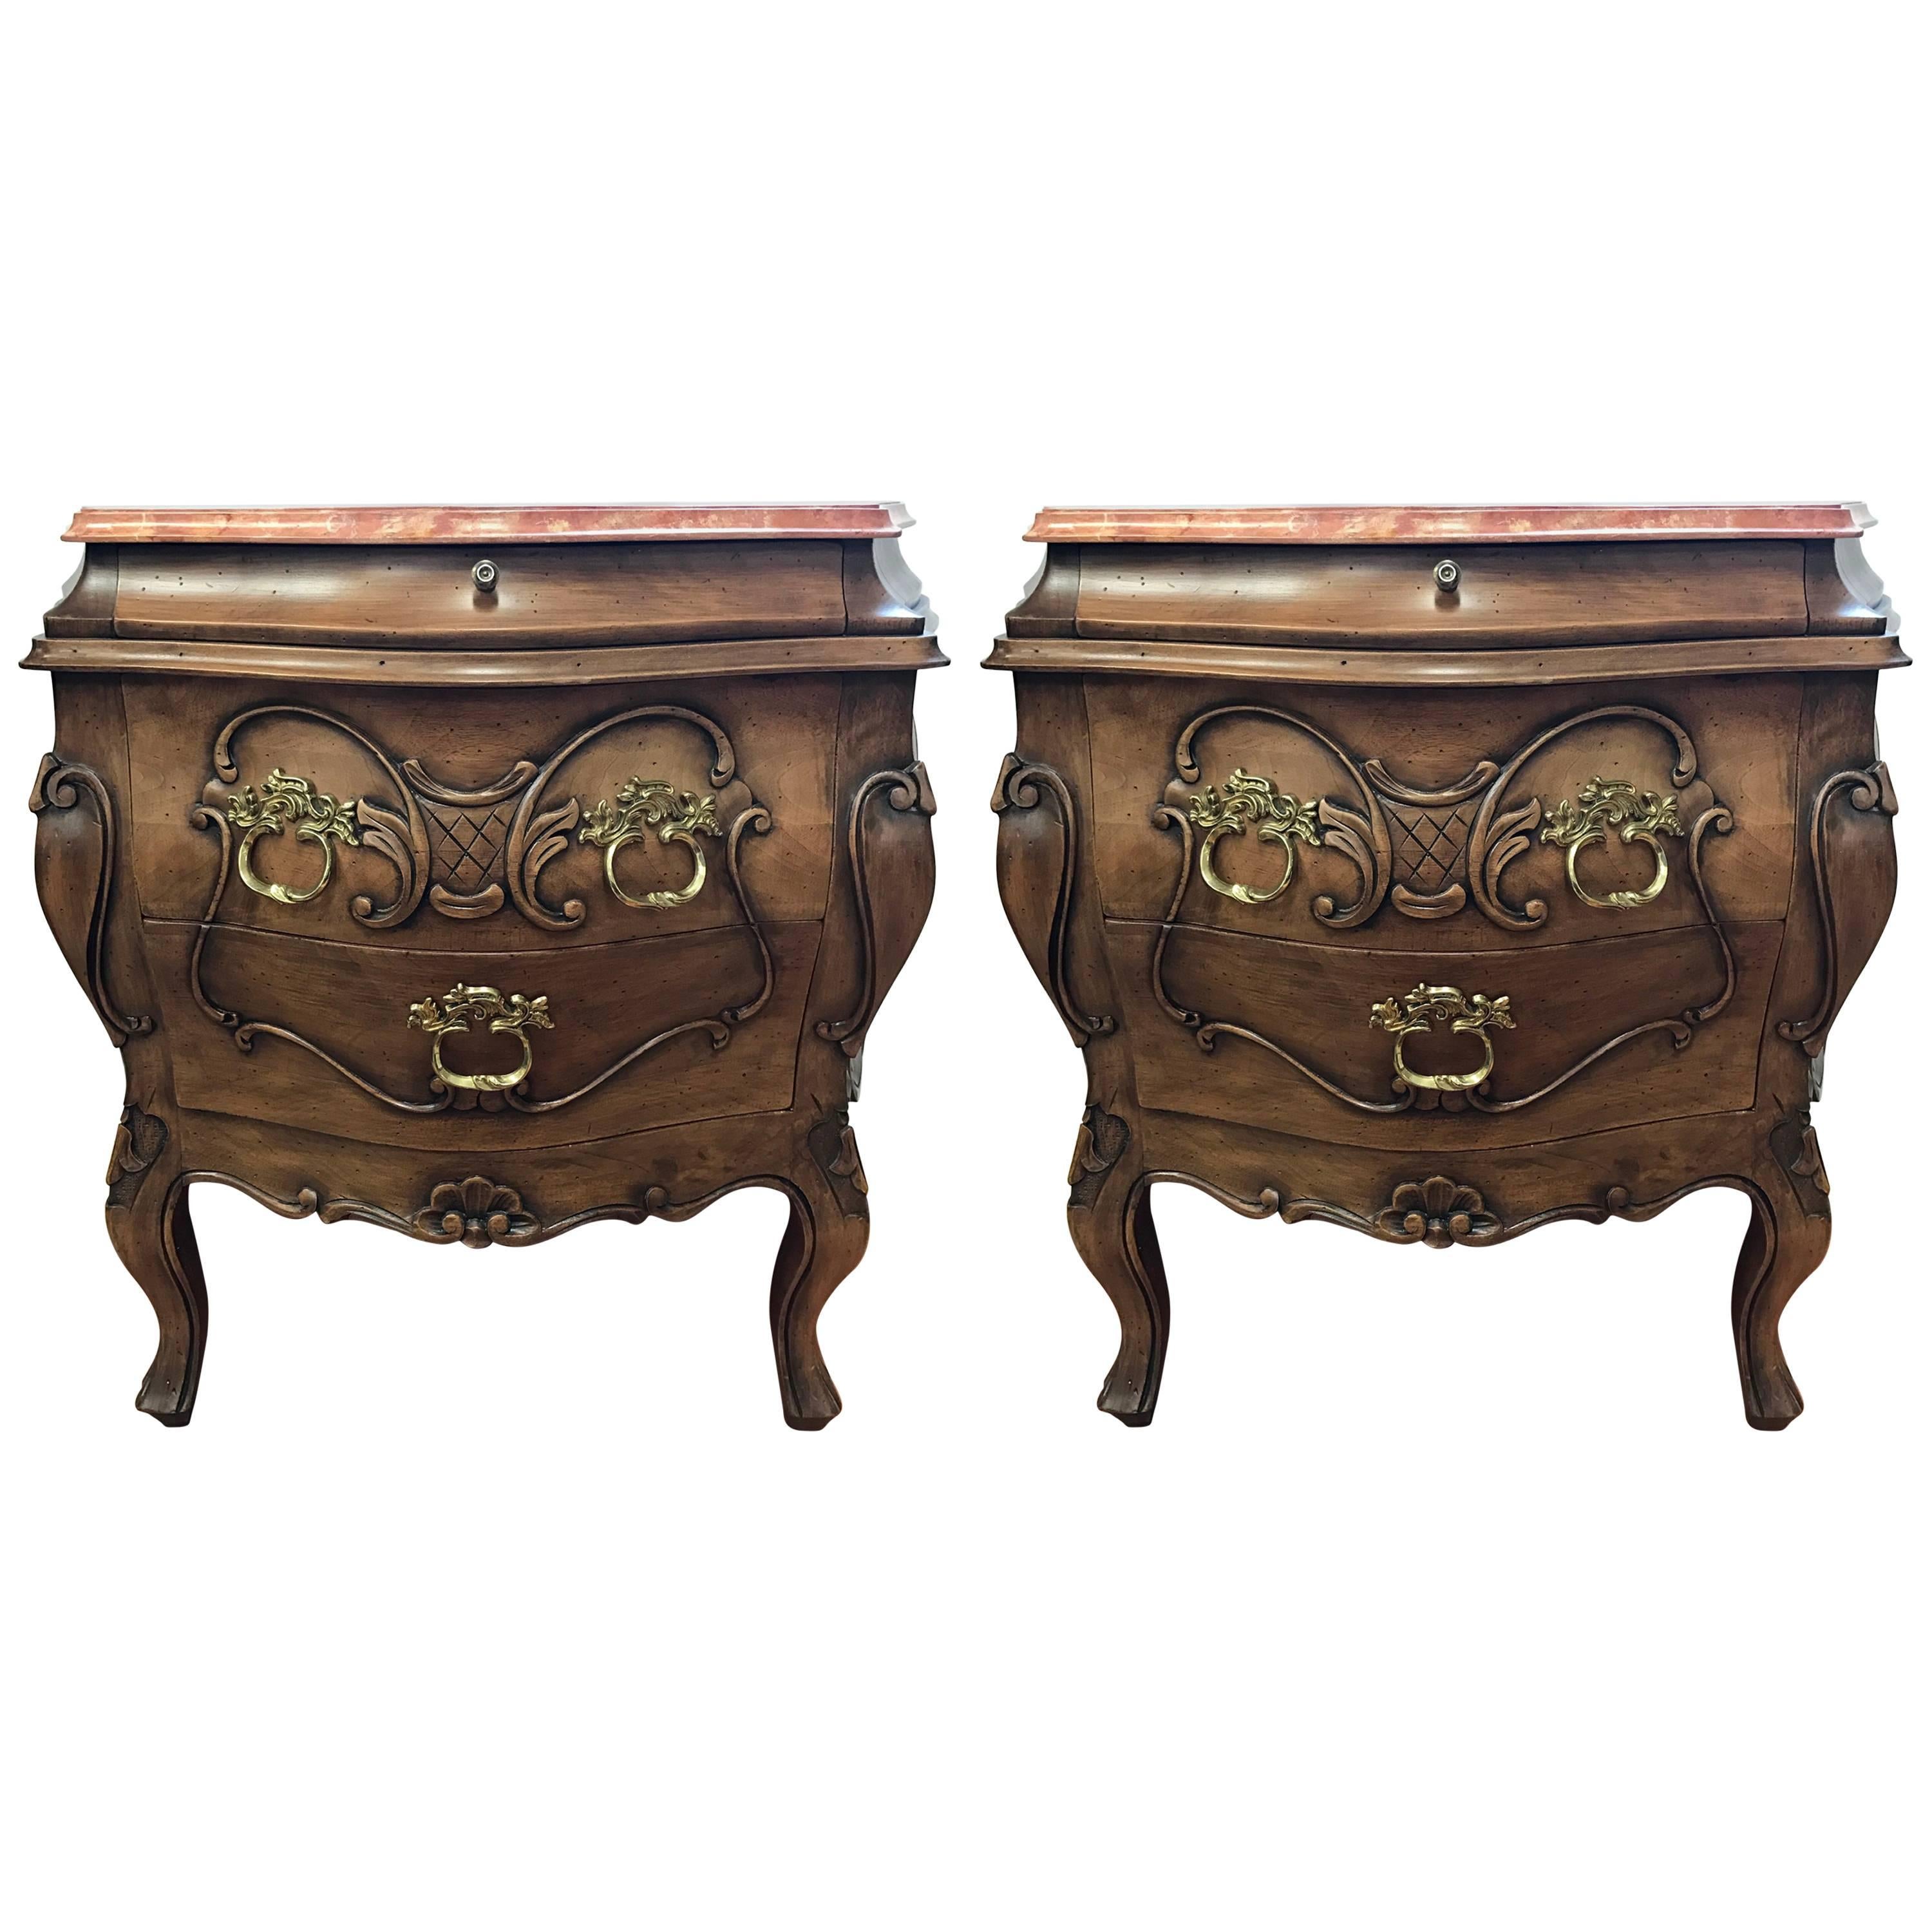 Pair of Neoclassical Marble-Top Three-Drawer Nightstands Bombe Chests